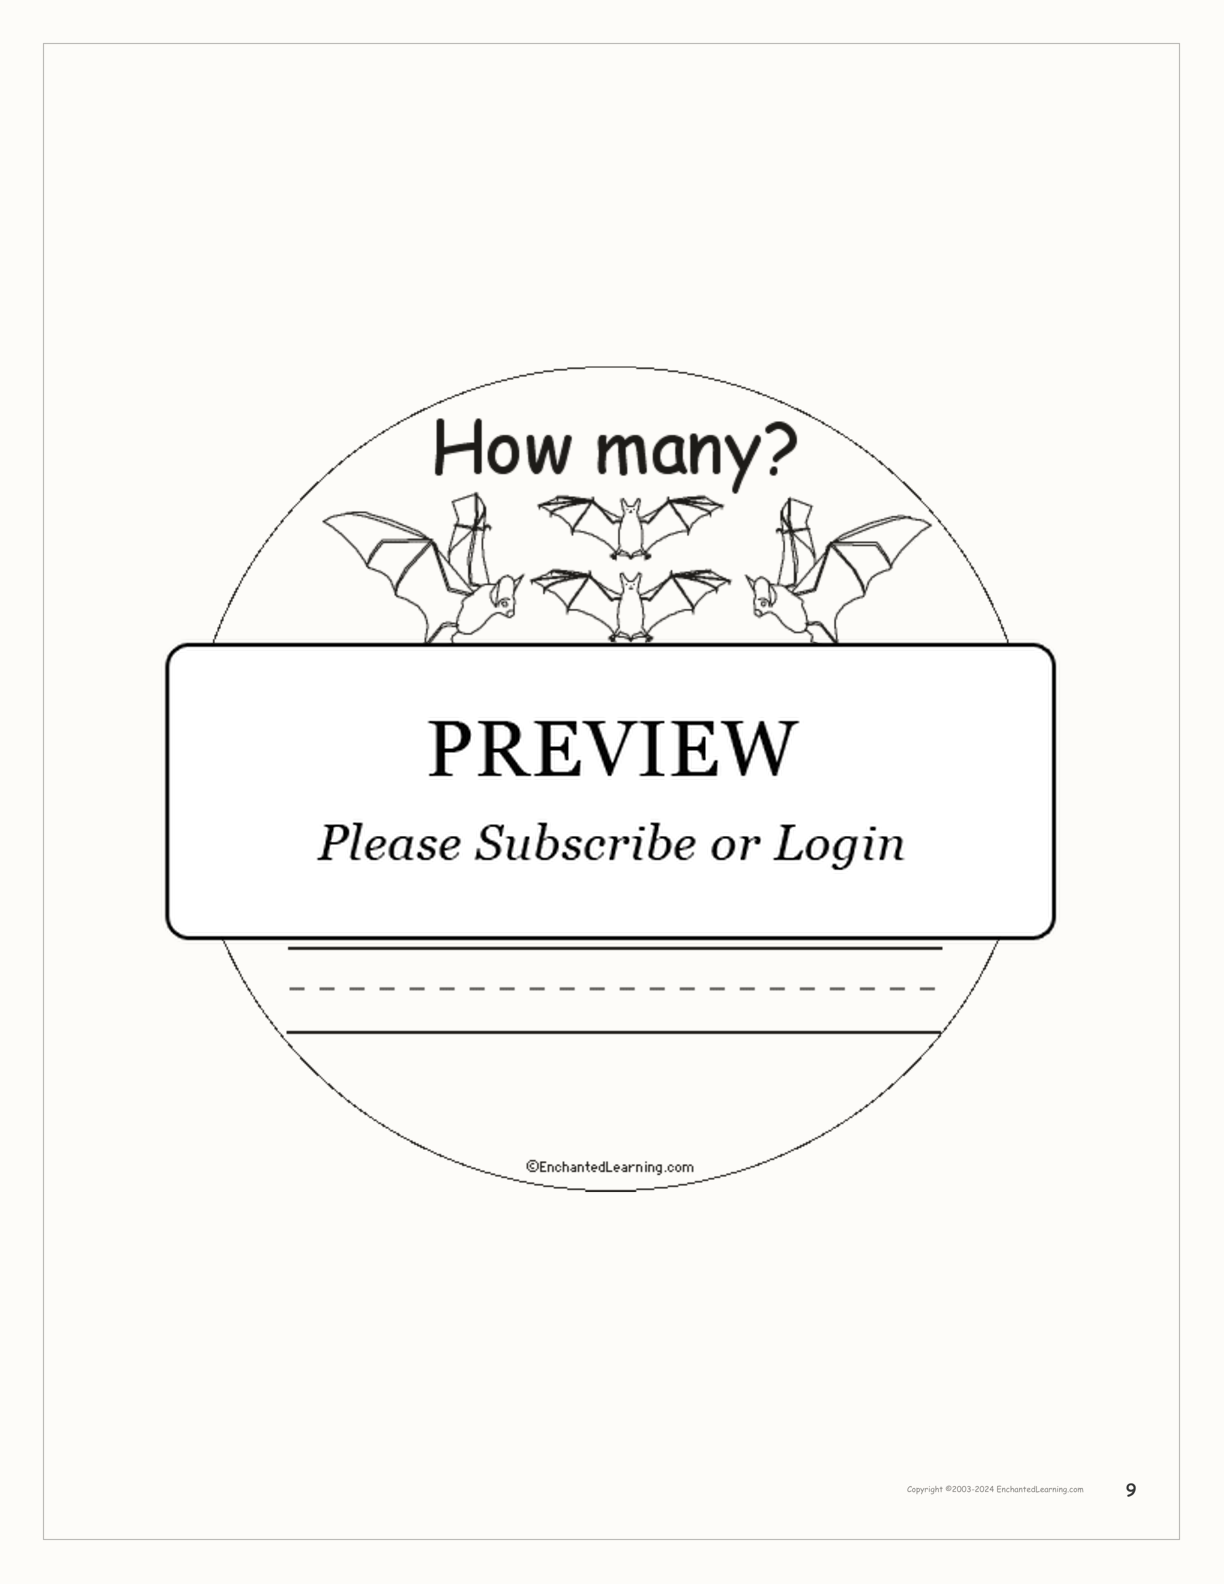 How Many Bats? Book for Early Readers interactive printout page 9